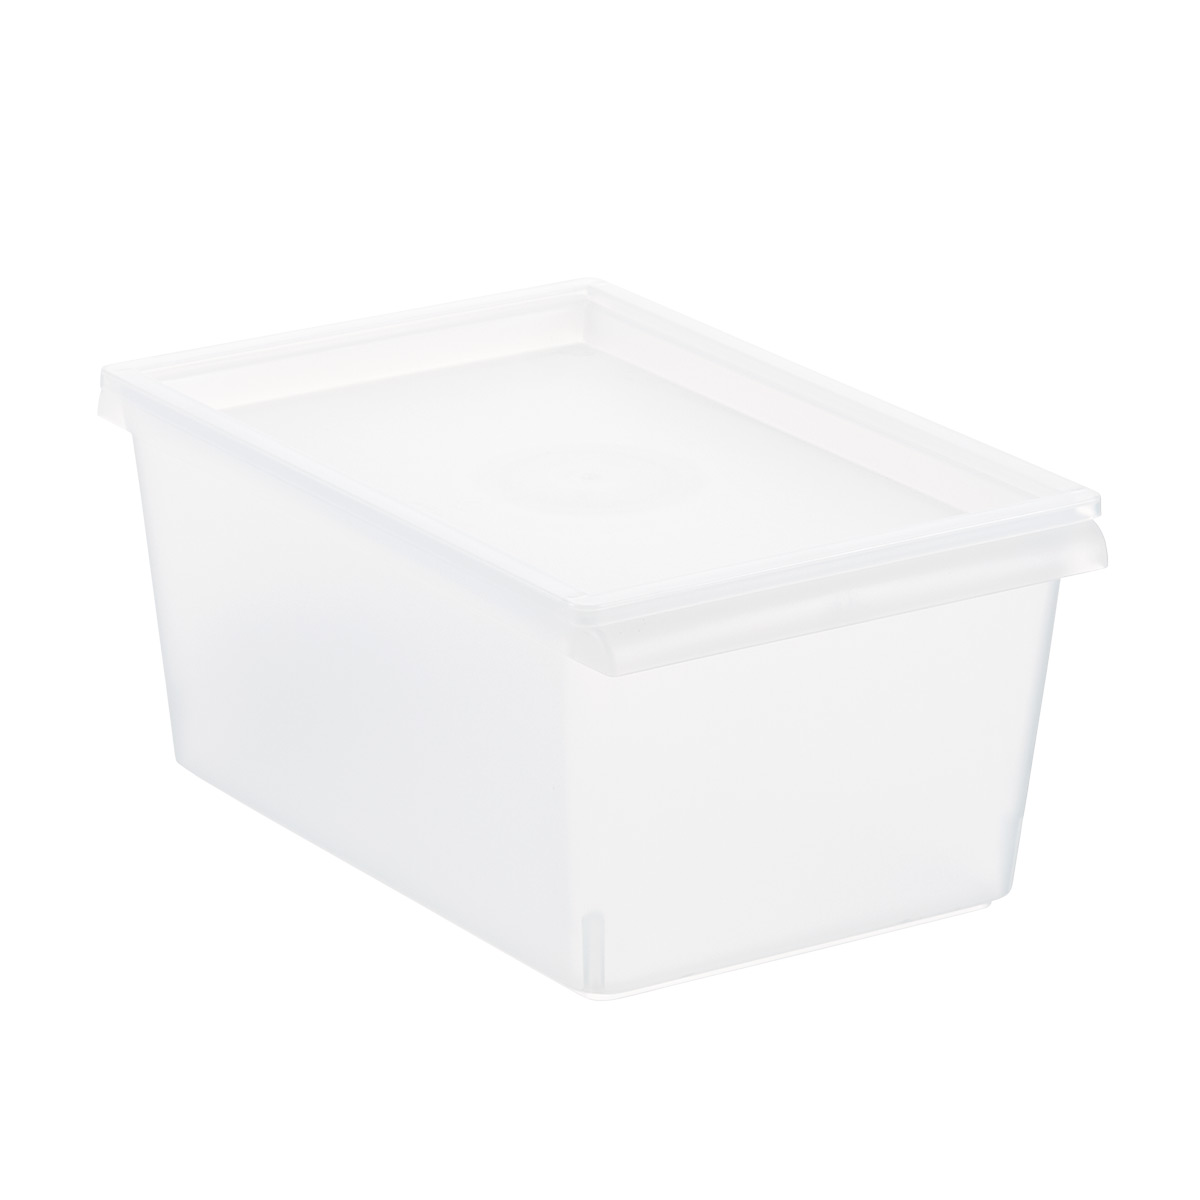 https://www.containerstore.com/catalogimages/365055/10077705-plastic-bin-with-lid-clear-.jpg